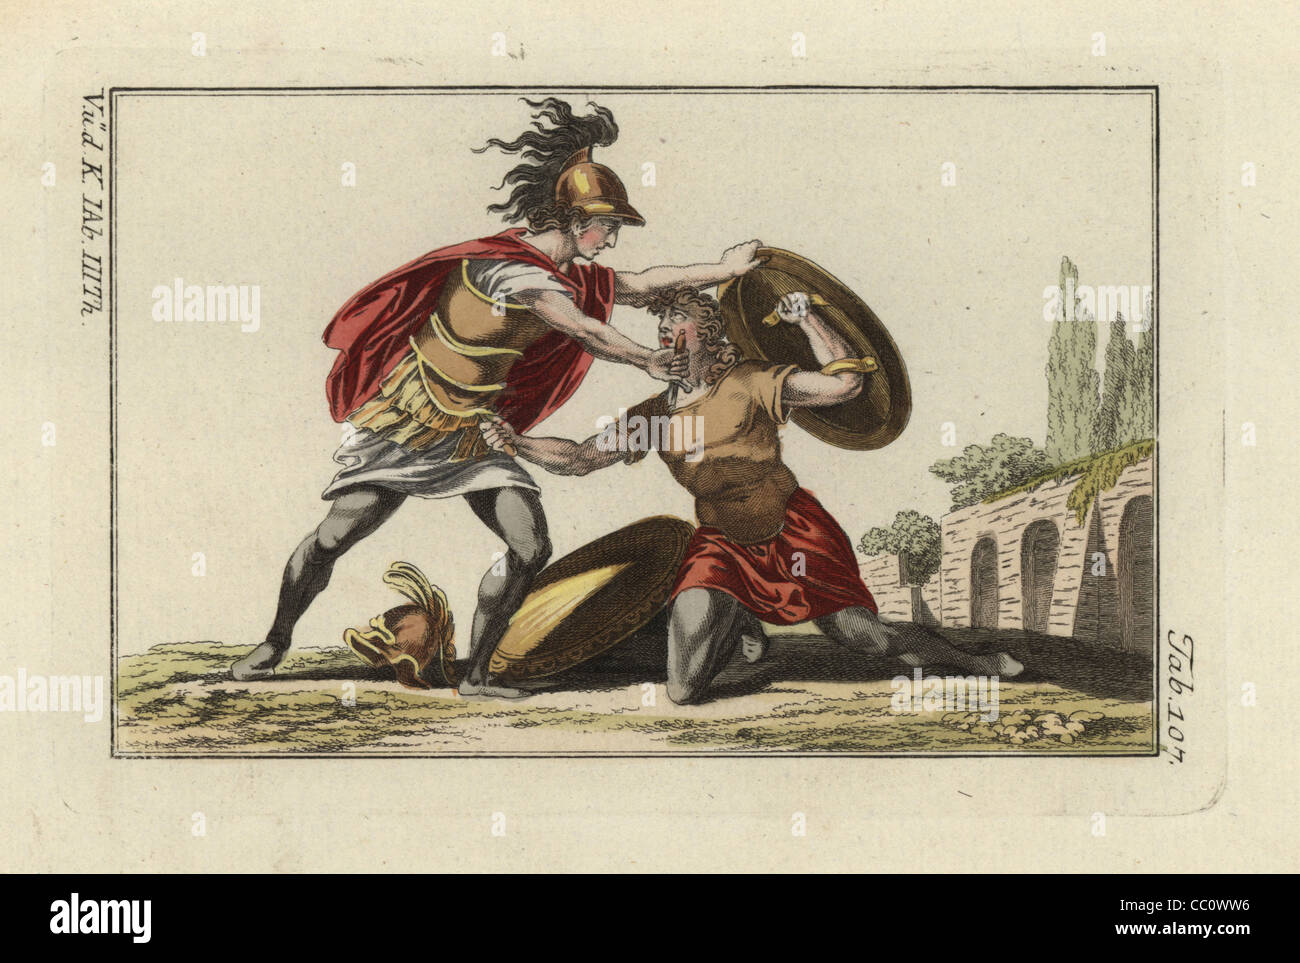 Two Etruscan warriors in mortal combat with daggers. Stock Photo